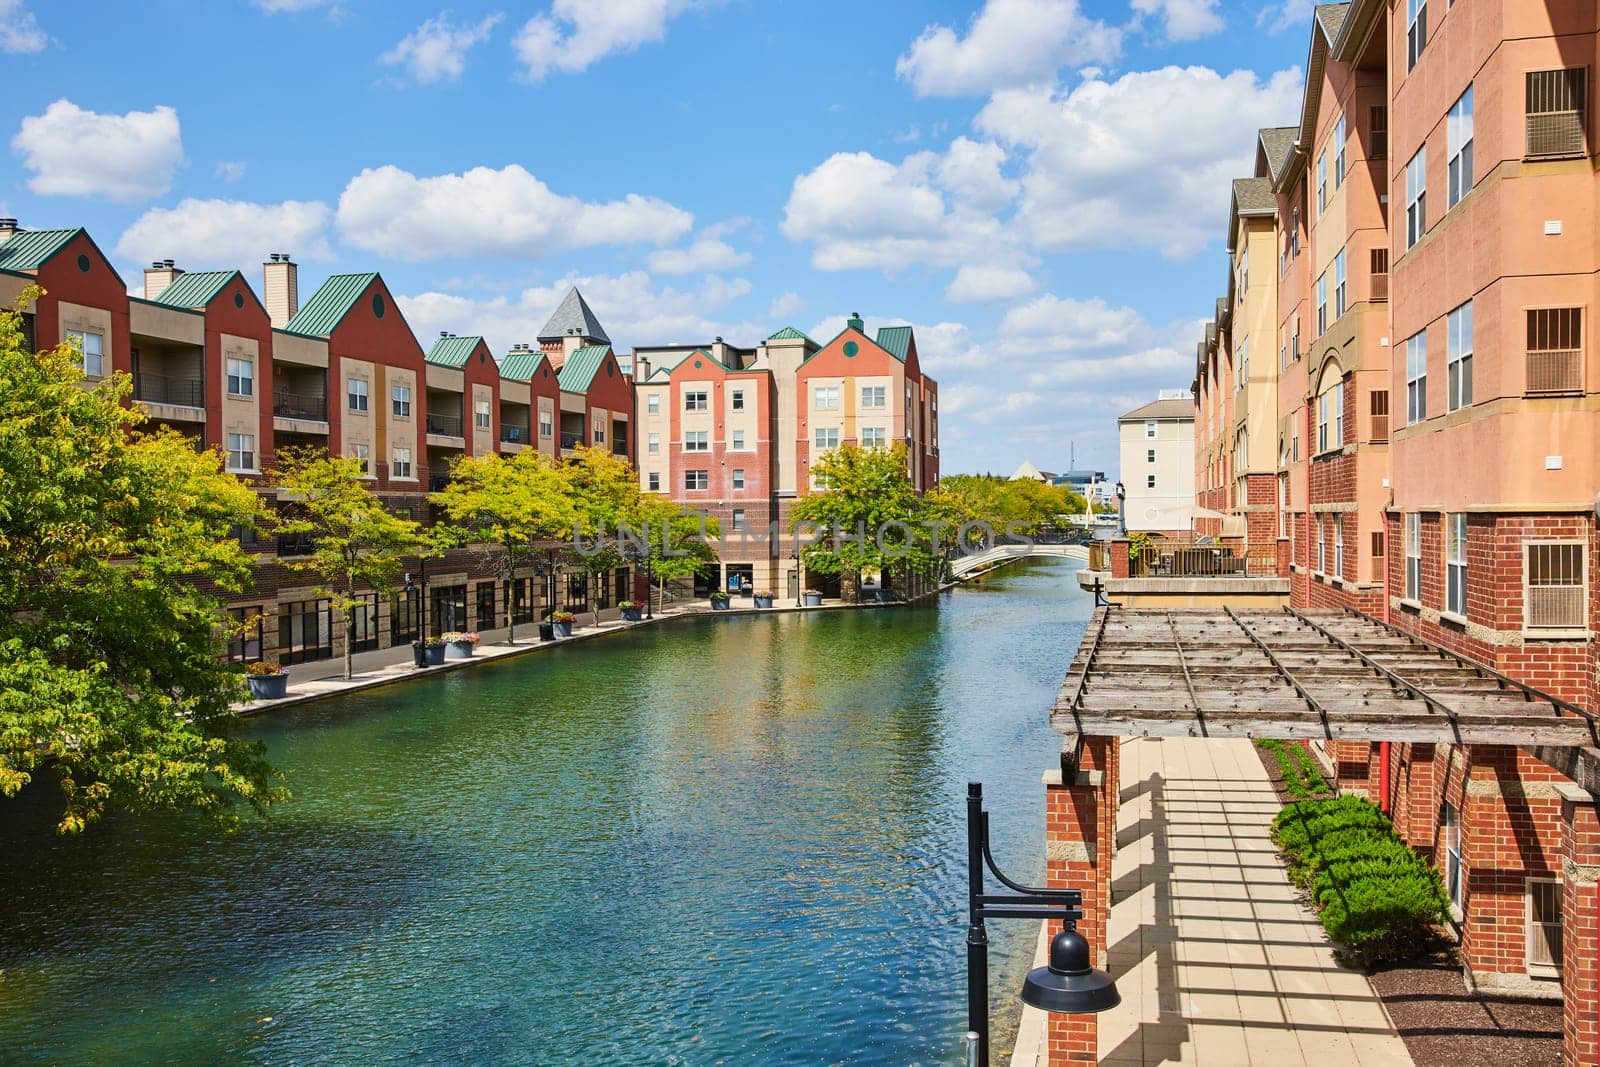 Daytime shot of modern yet quaint canal-side living in Indianapolis, 2023, featuring colorful residential buildings with commercial spaces, and peaceful waterfront ambiance.